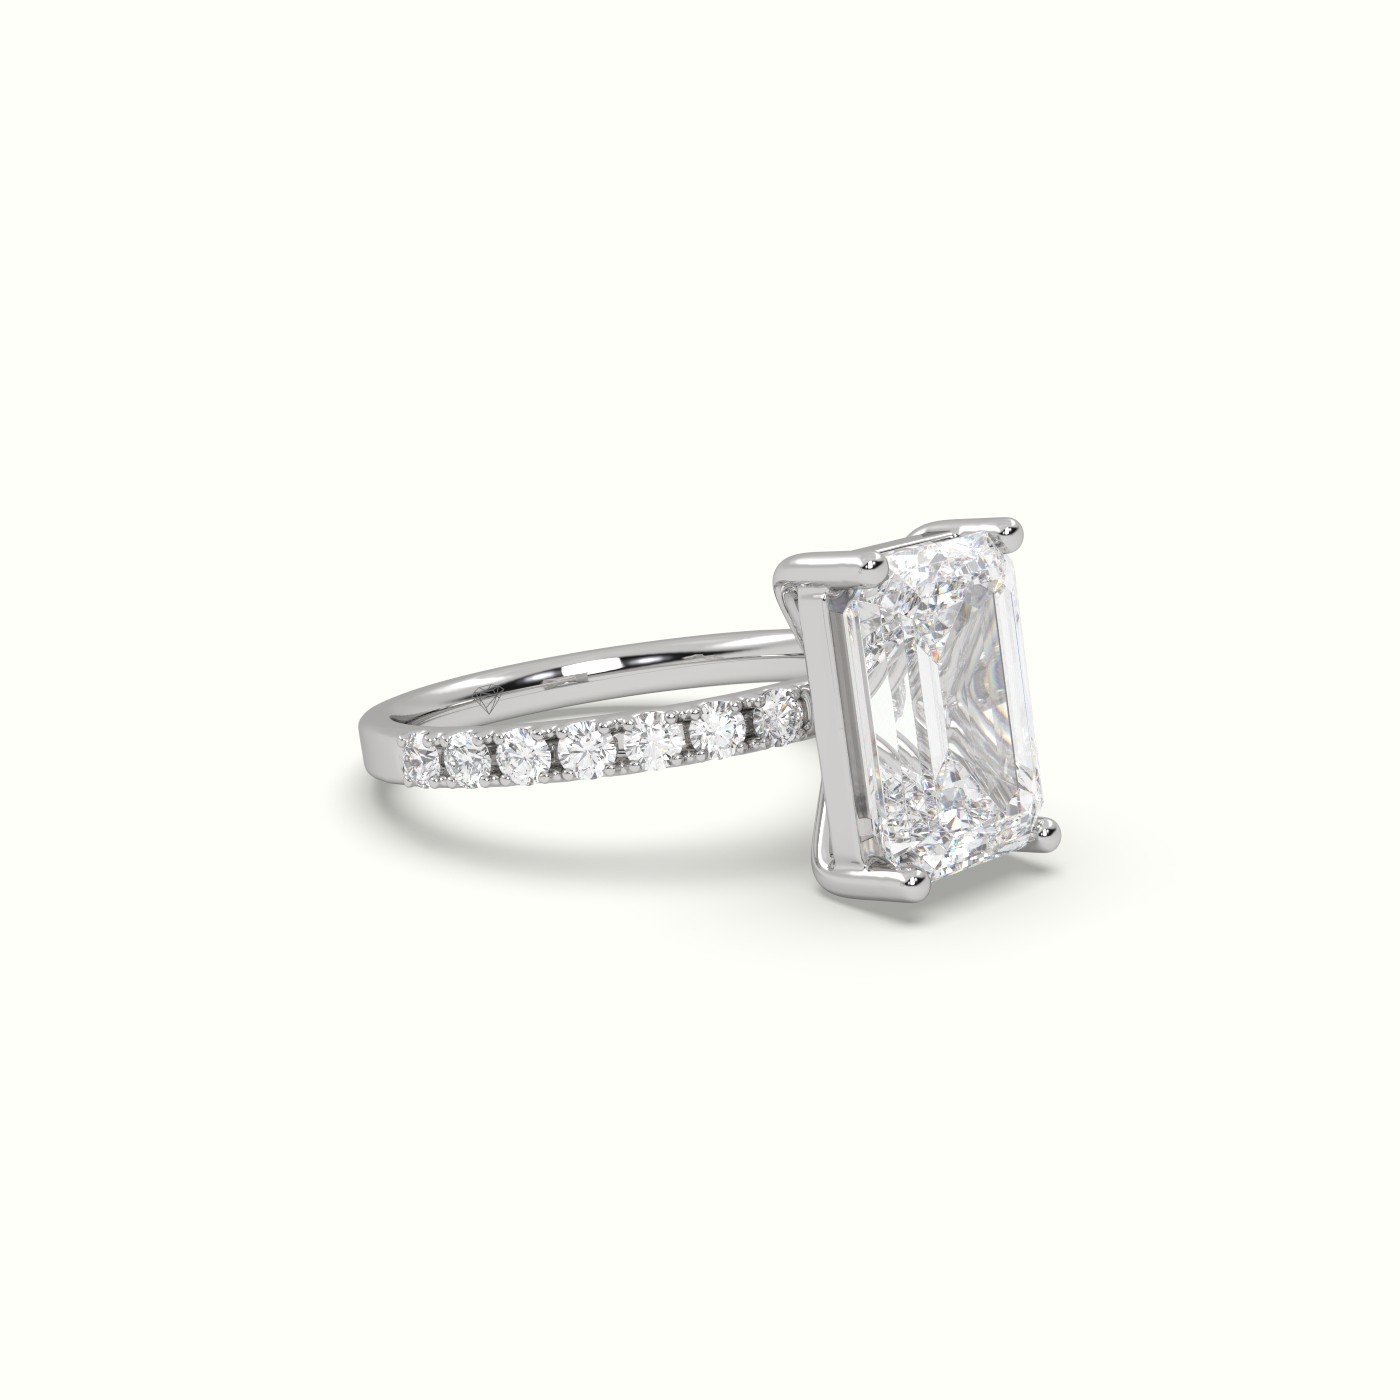 18K WHITE GOLD Emerald Cut Diamond 4 ROUND PRONGS Engagement Ring with Pave Band - Precious Jewels Antwerp Elegance